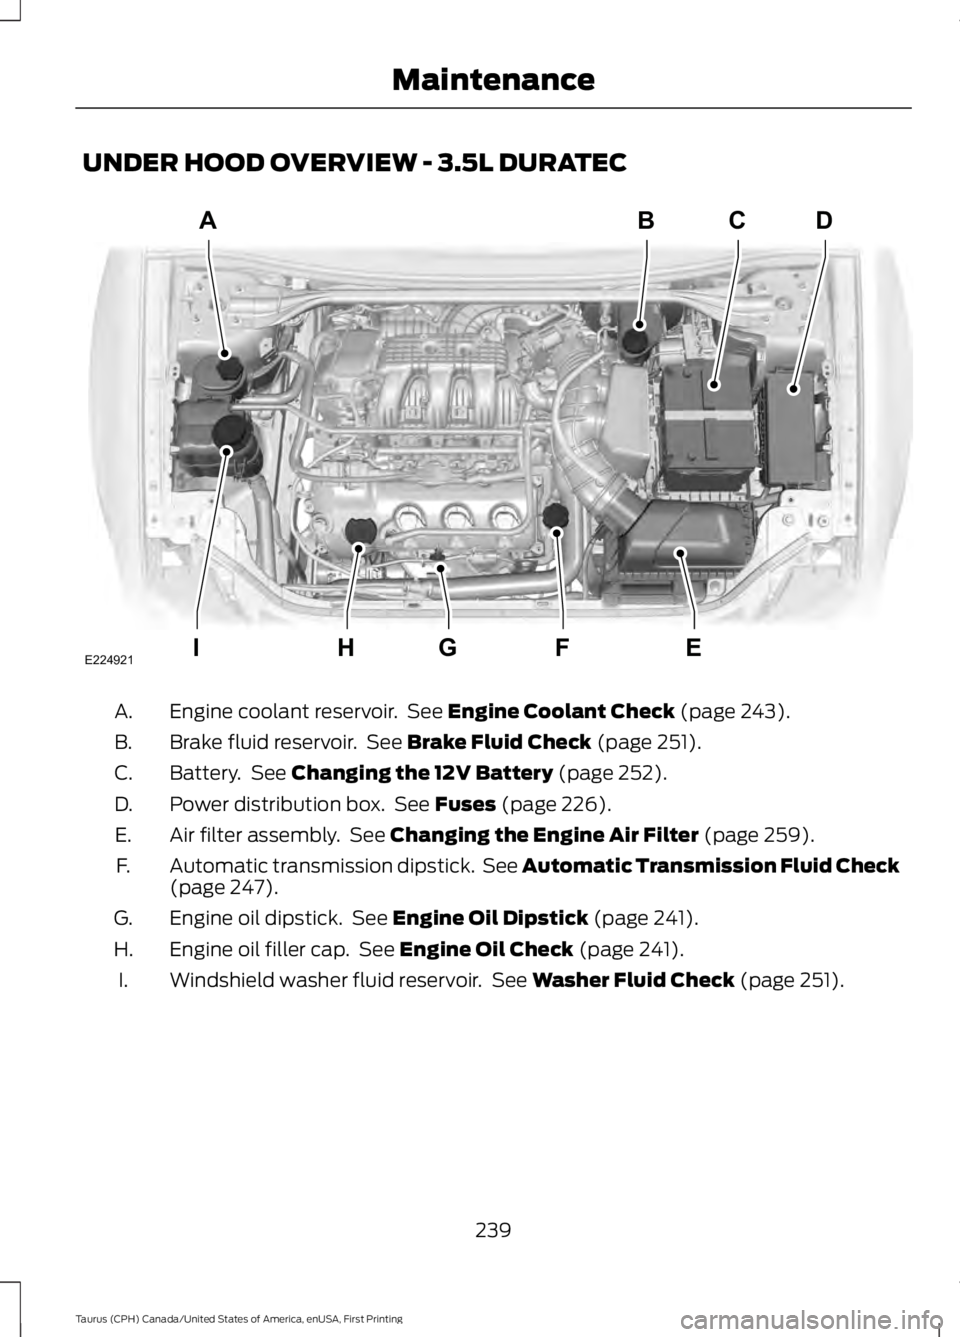 FORD TAURUS 2017  Owners Manual UNDER HOOD OVERVIEW - 3.5L DURATEC
Engine coolant reservoir.  See Engine Coolant Check (page 243).A.
Brake fluid reservoir.  See Brake Fluid Check (page 251).B.
Battery.  See Changing the 12V Battery 